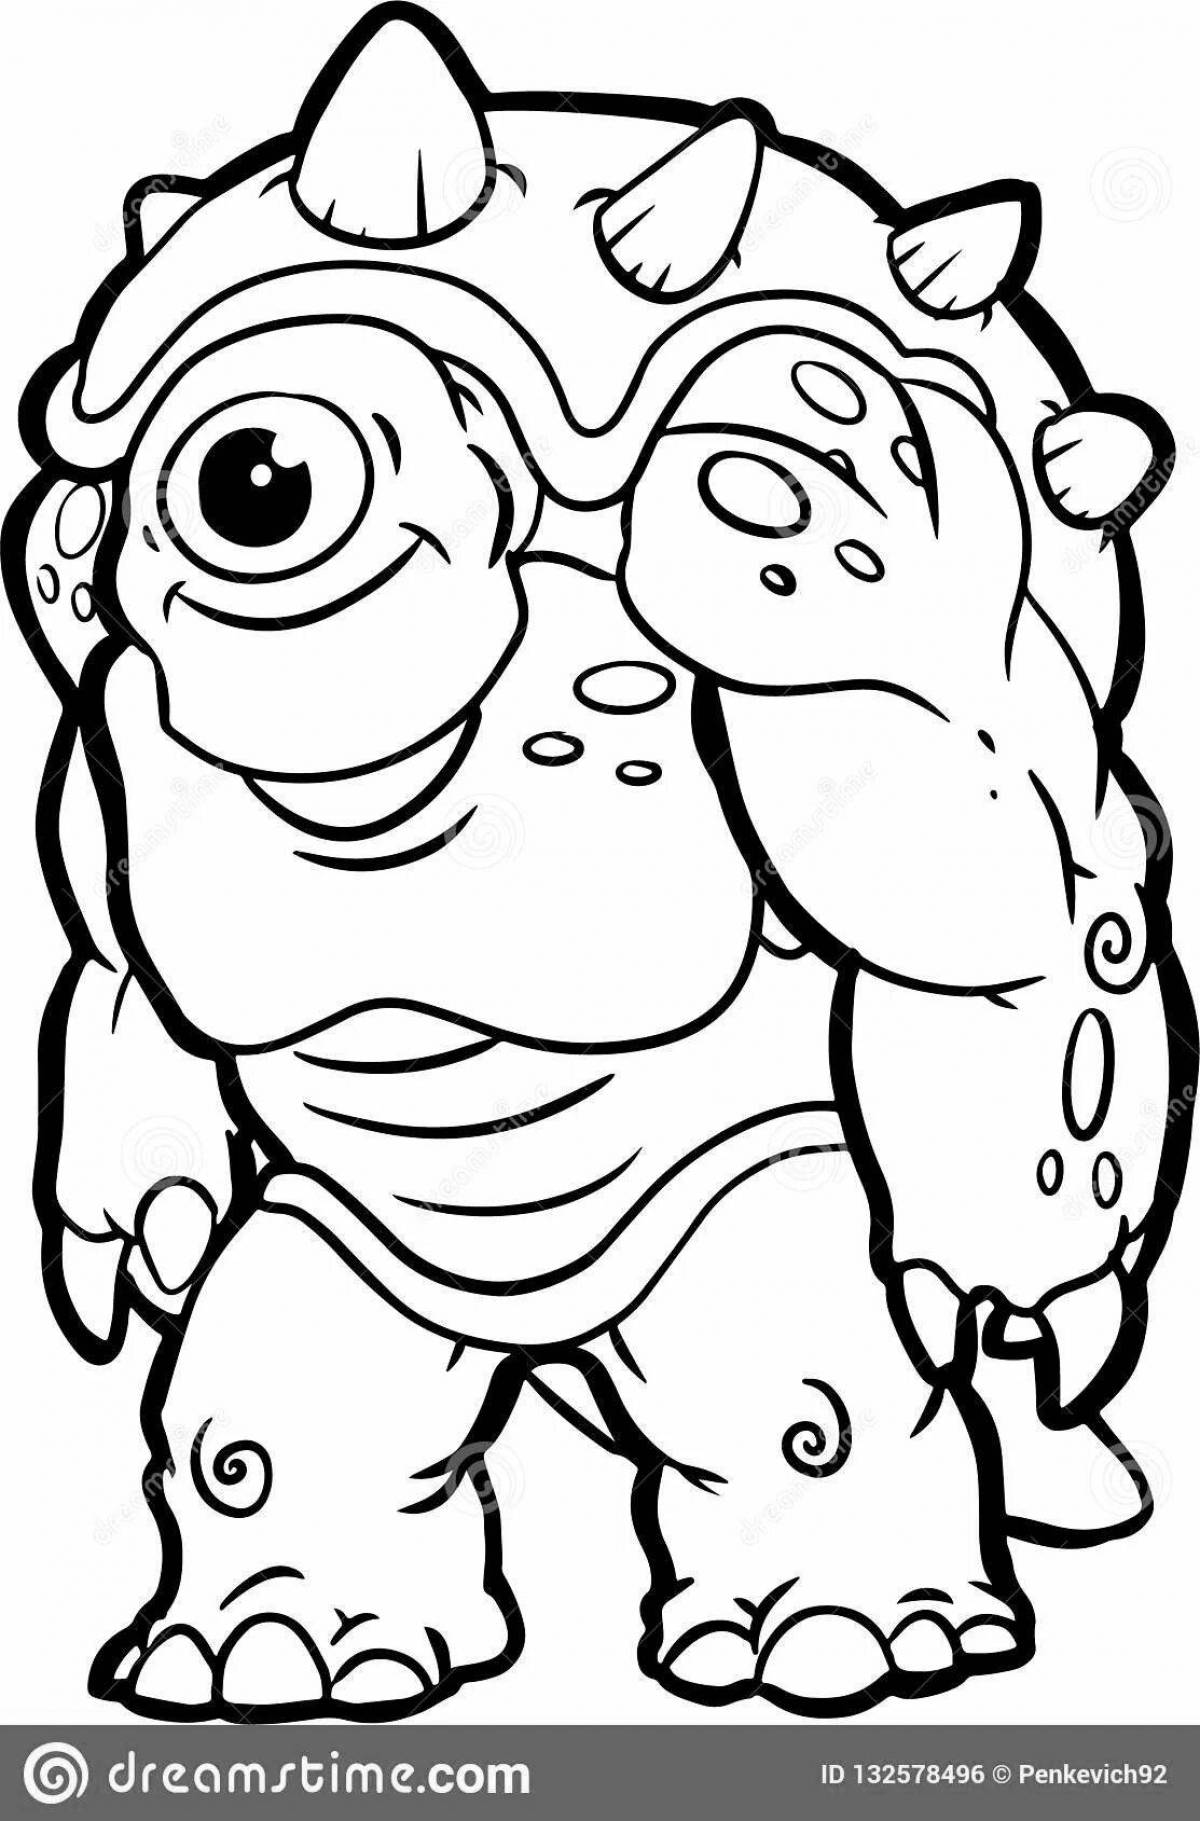 Crazy one-eyed monster coloring page